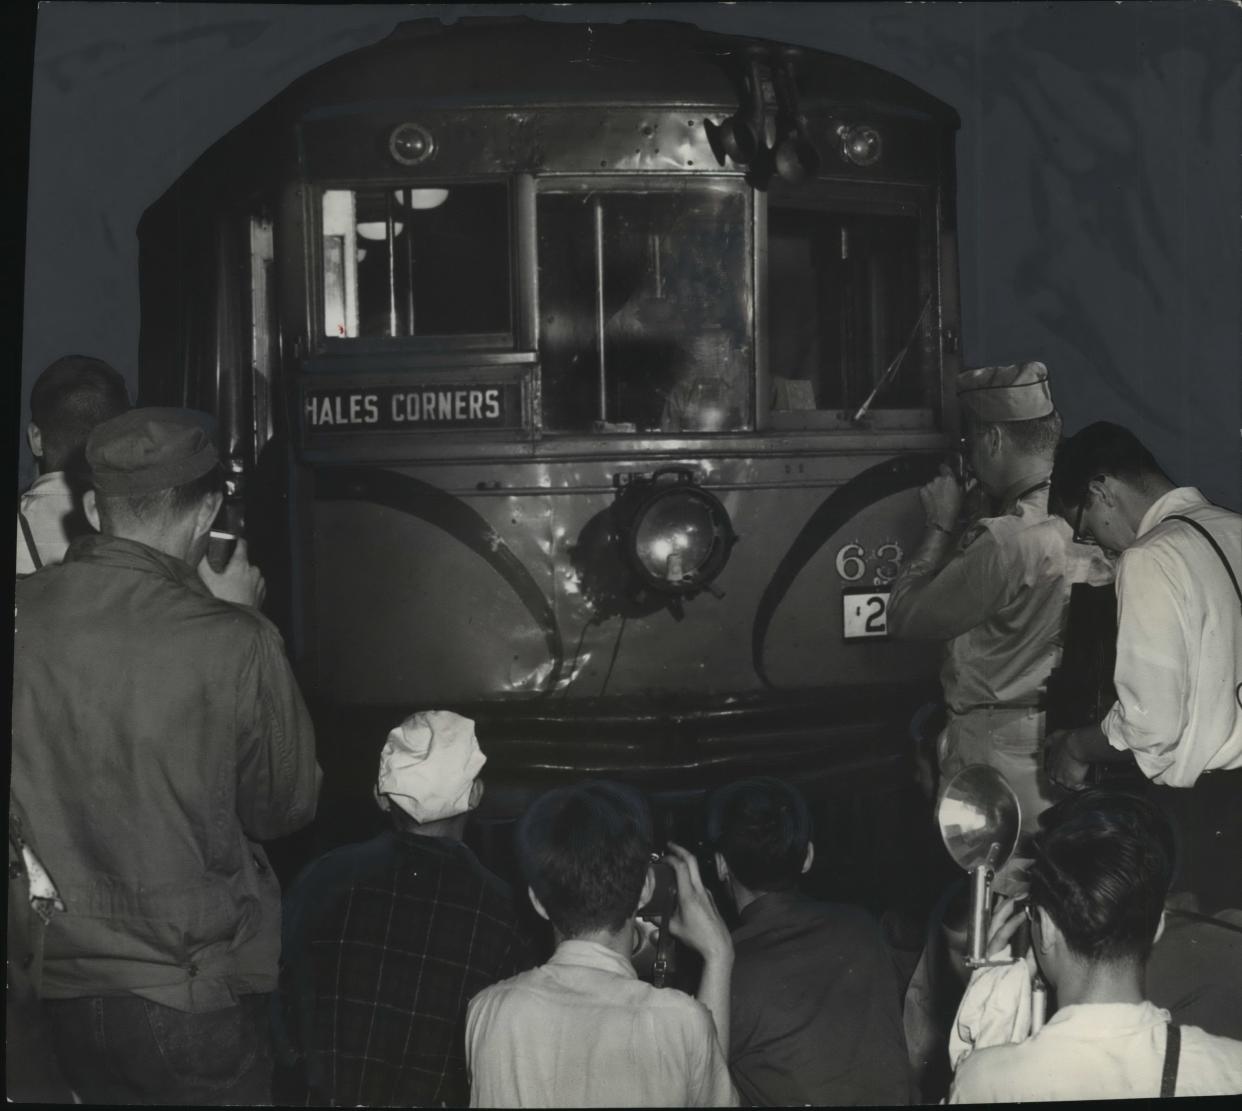 Railroad fans crowd to take pictures of the Milwaukee Rapid Transit & Speedrail line train car at the downtown Milwaukee terminal before it makes its final run to Hales Corners on June 30, 1951.